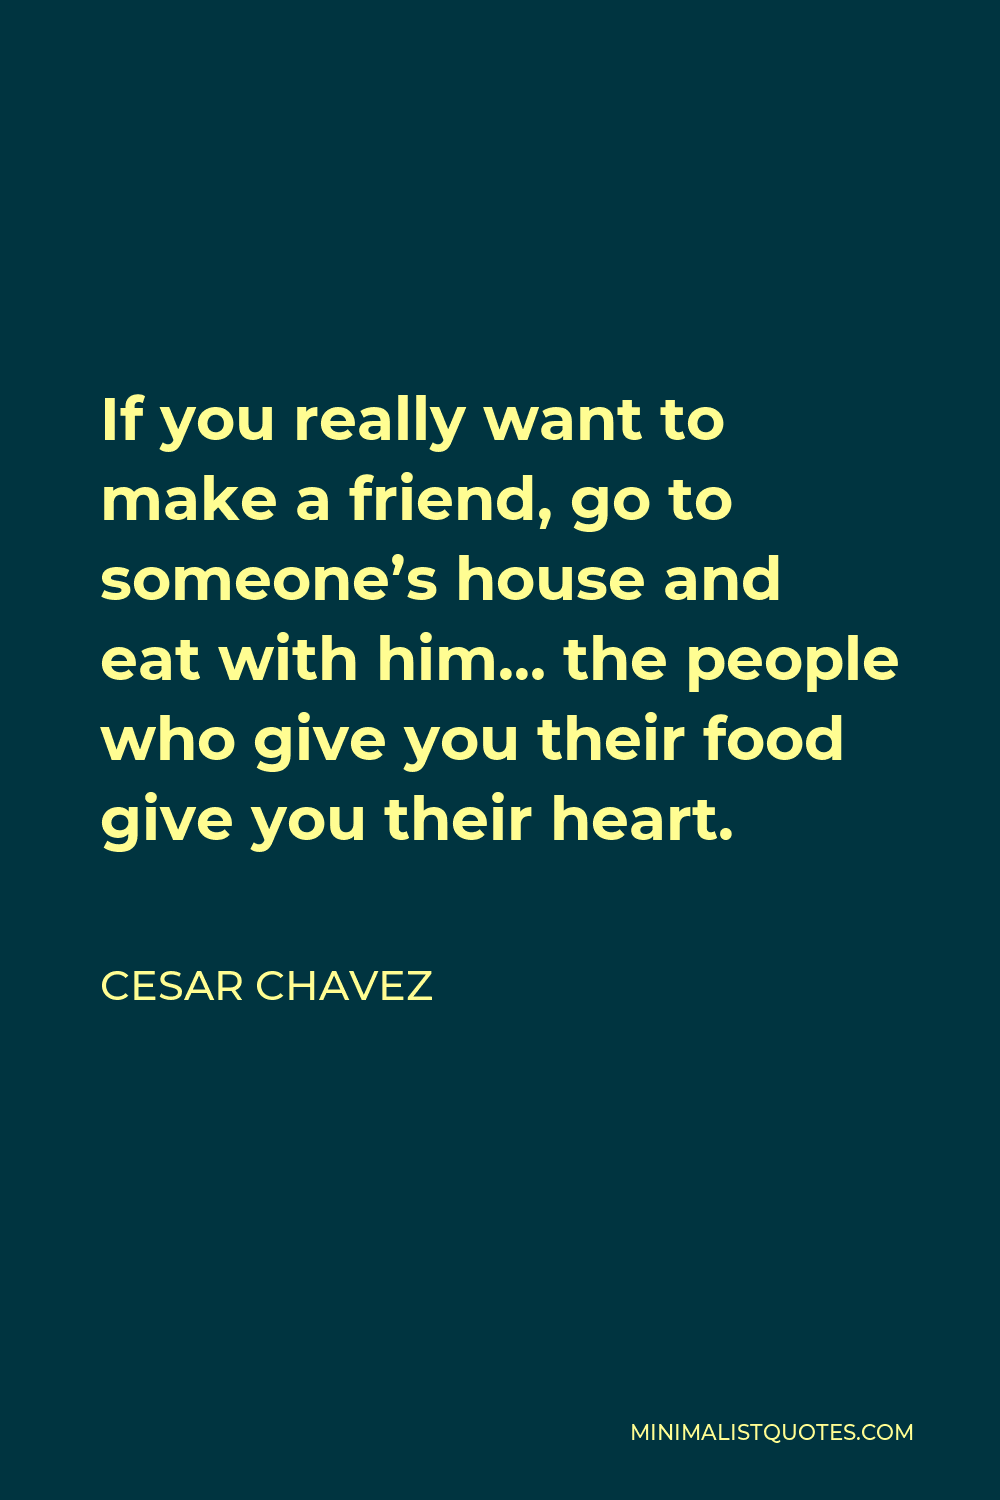 Cesar Chavez Quote: If you really want to make a friend, go to someone ...